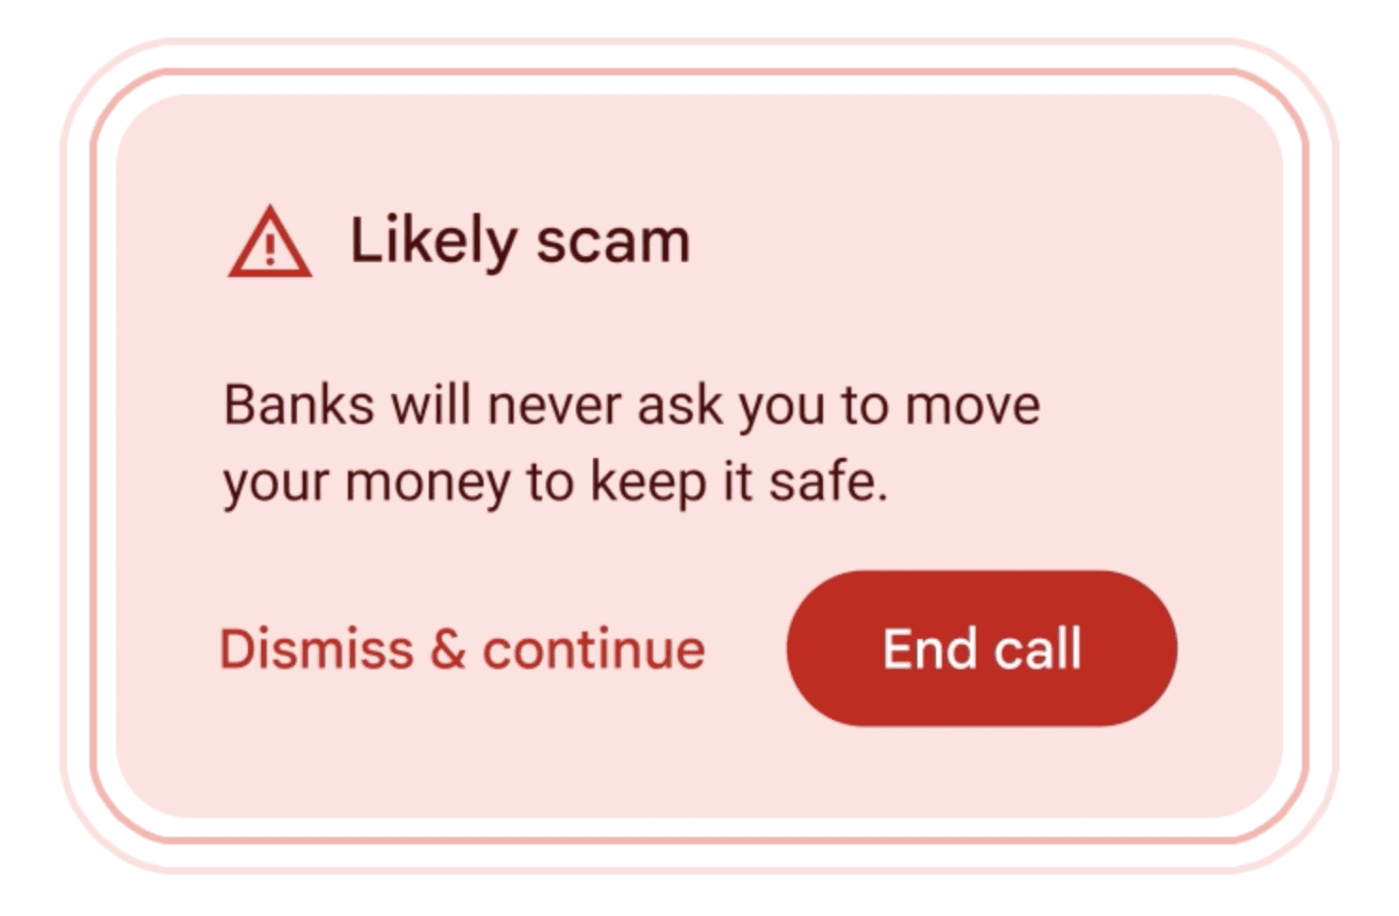 Google announces new scam detection tools that provide real-time alerts during phone calls